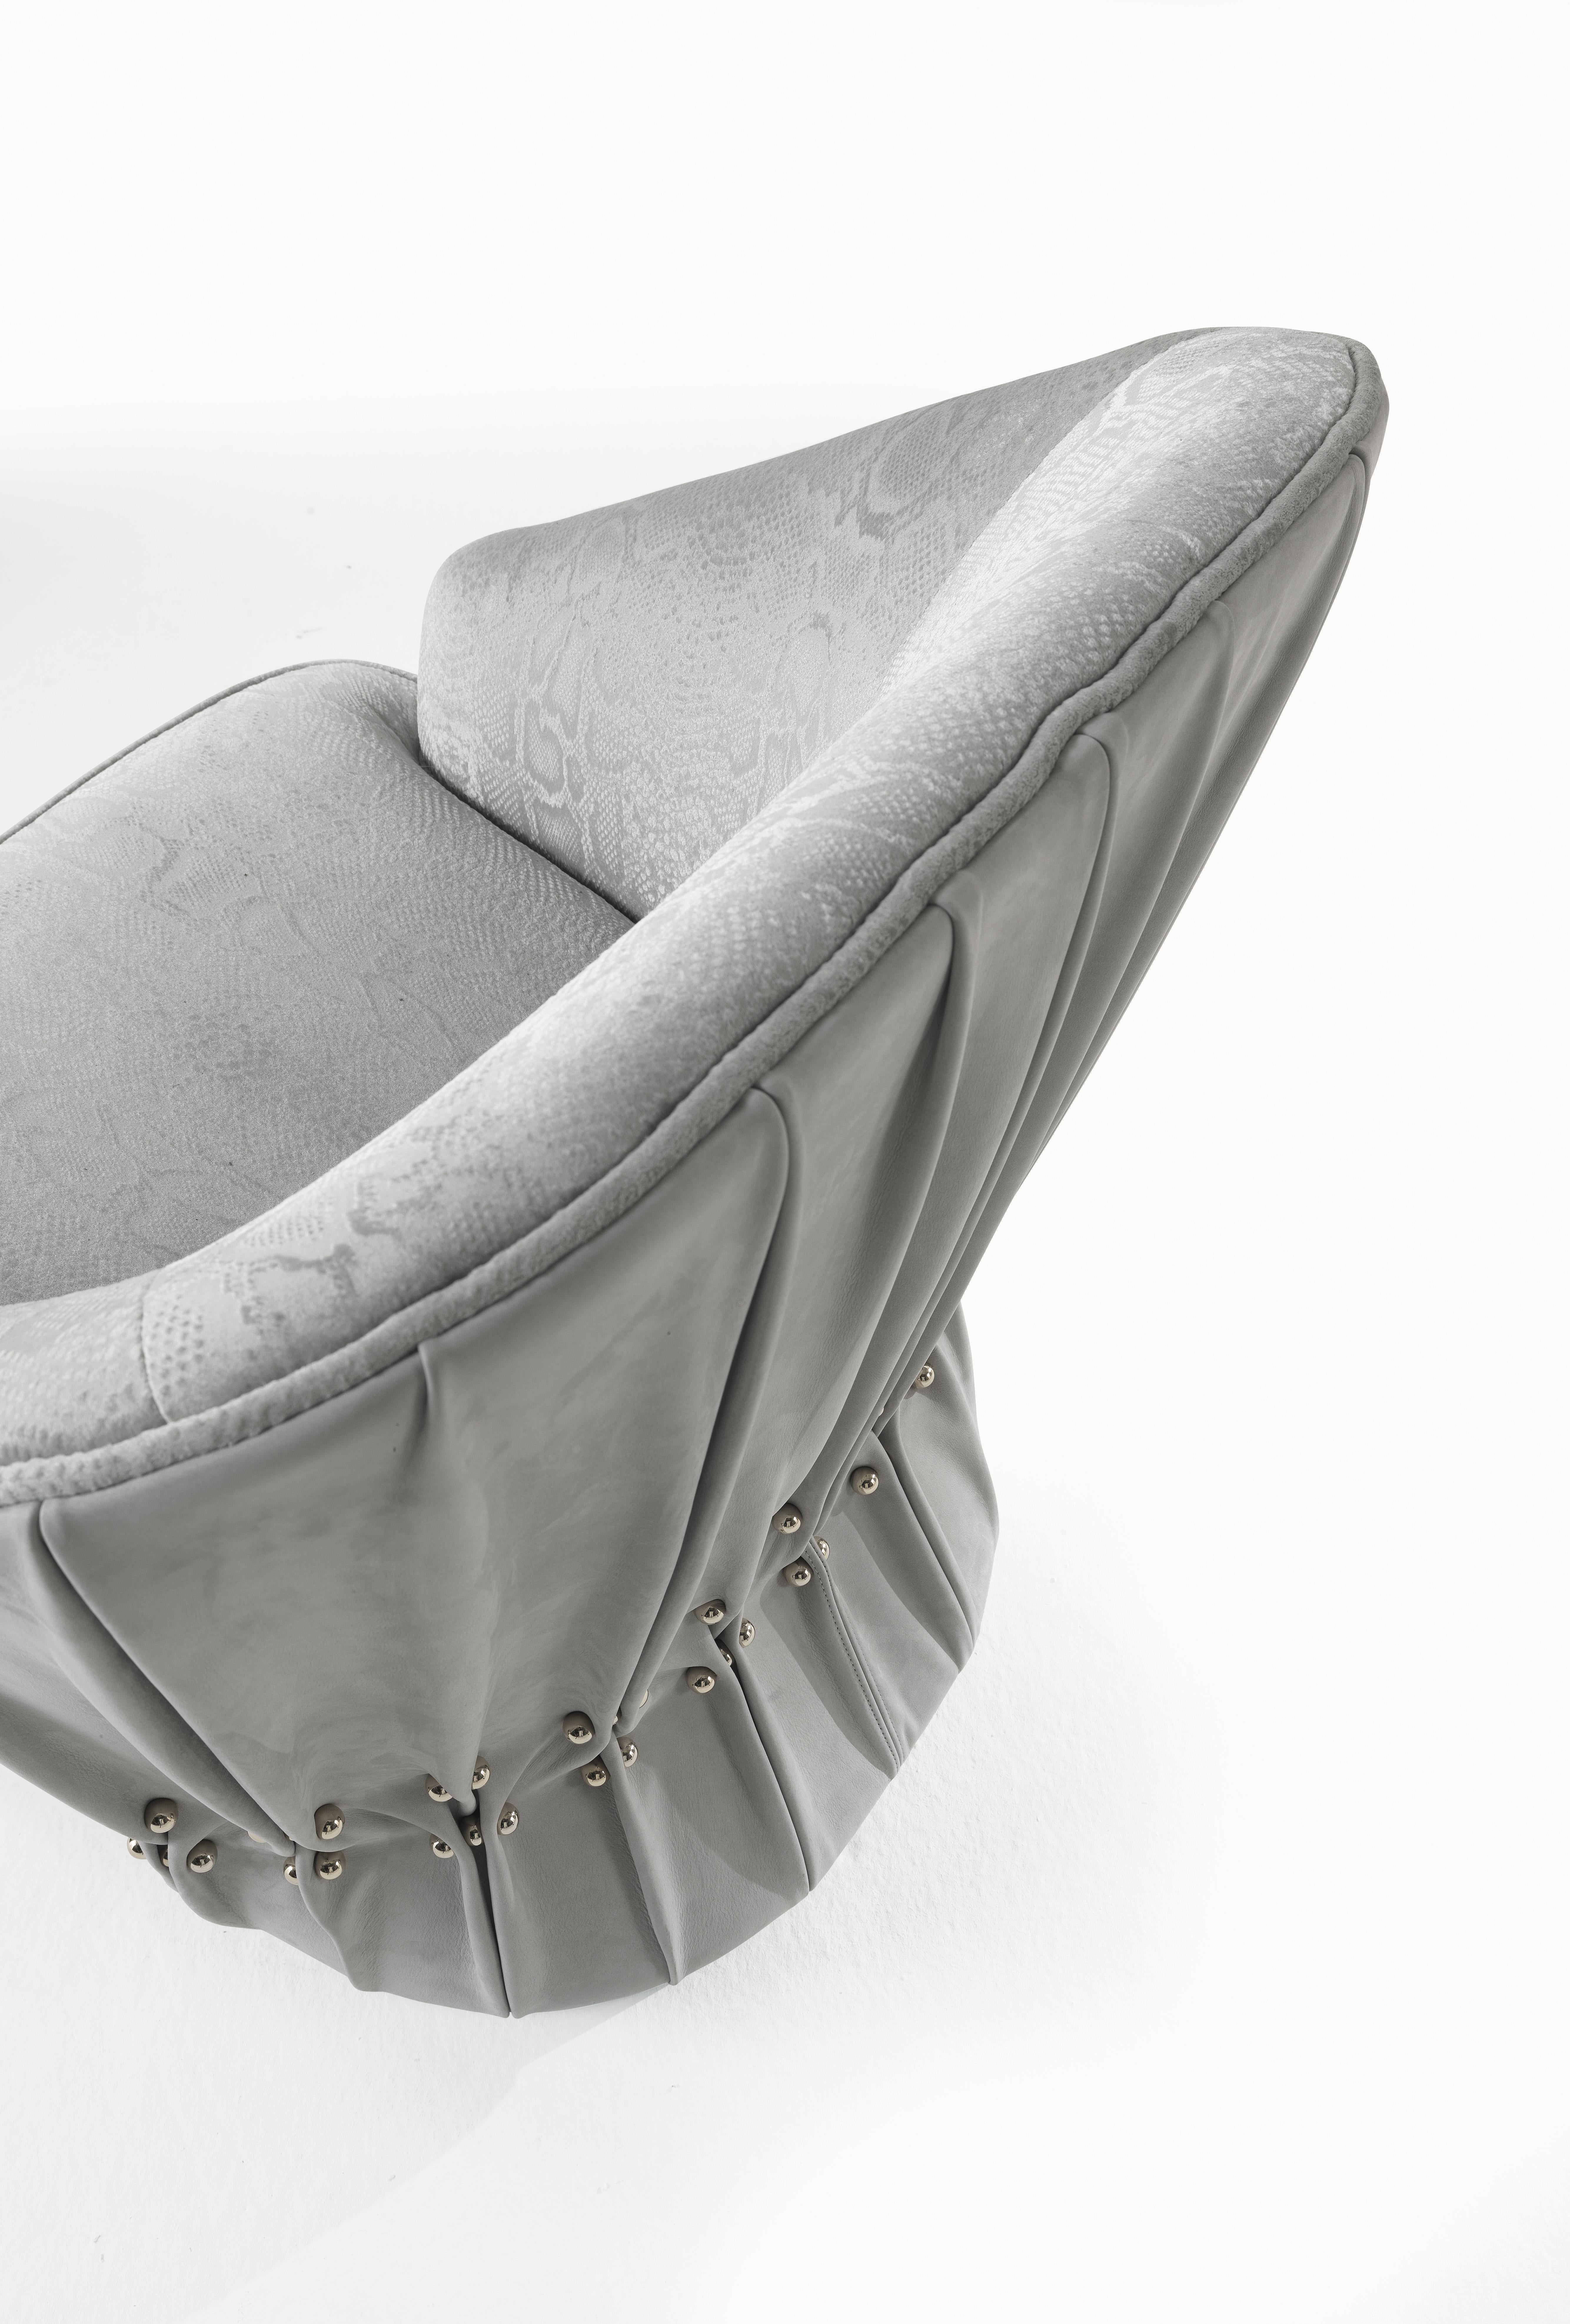 21st Century Inanda Armchair in Leather by Roberto Cavalli Home Interiors In New Condition For Sale In Cantù, Lombardia